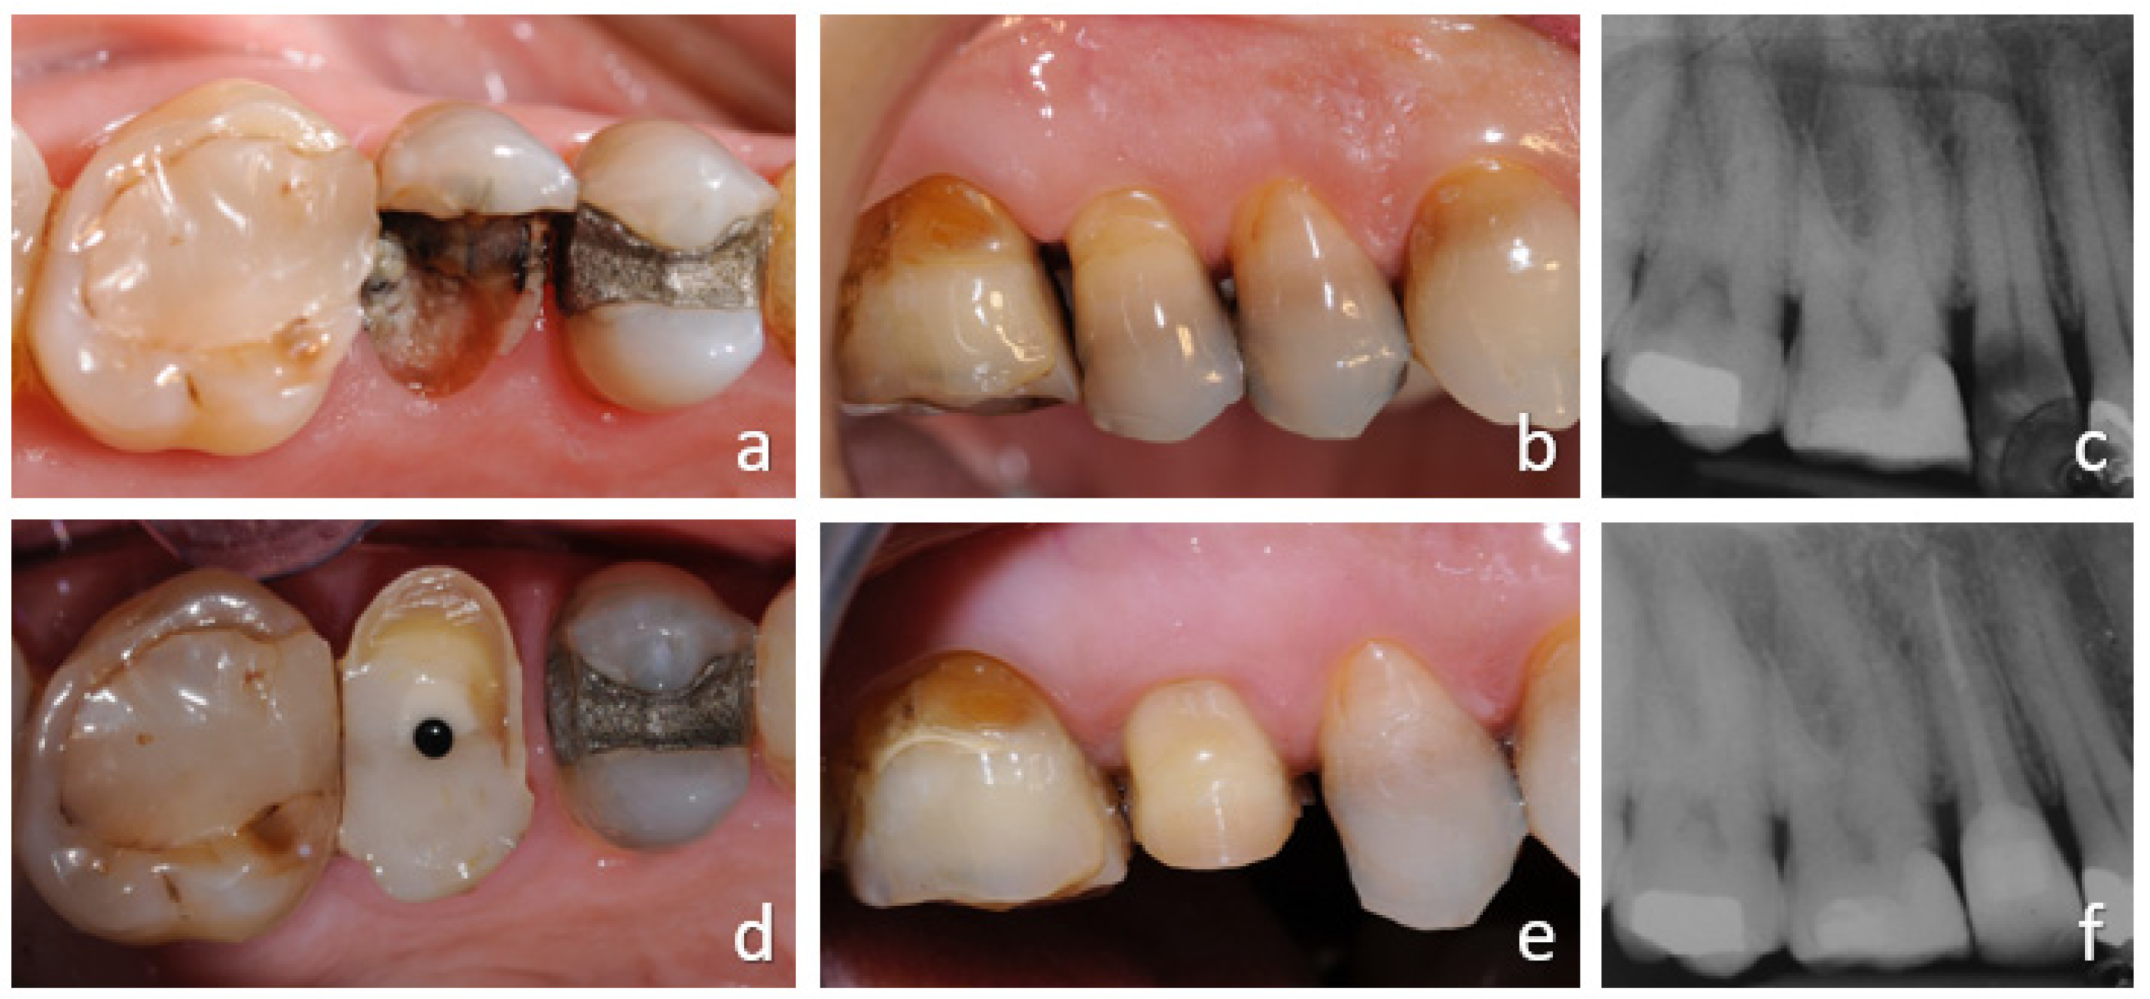 IJERPH | Free Full-Text | Orthodontic Extrusion vs. Surgical Extrusion to  Rehabilitate Severely Damaged Teeth: A Literature Review